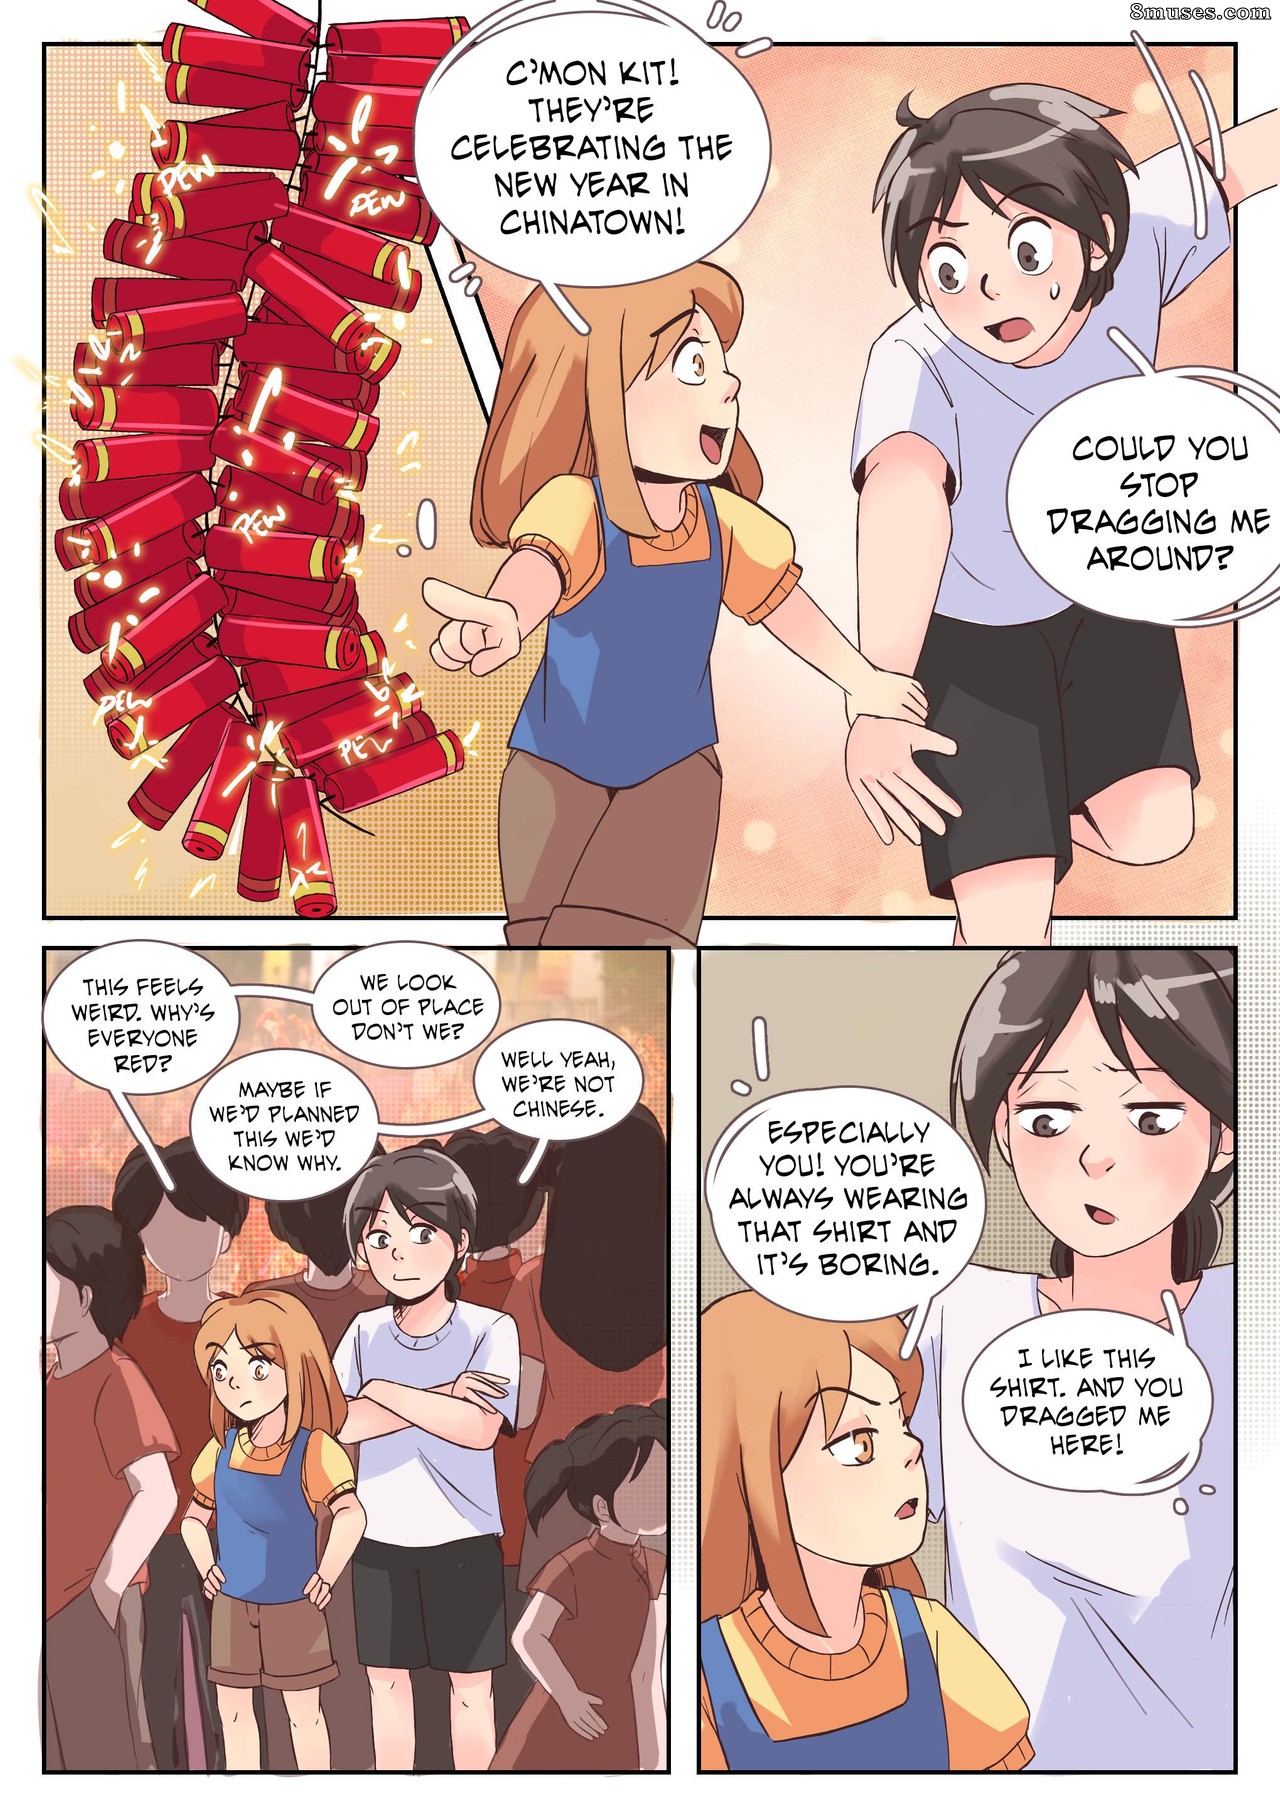 China Xxx Com 2019 - Chinese New Year Omake Issue 1 - 8muses Comics - Sex Comics and Porn  Cartoons